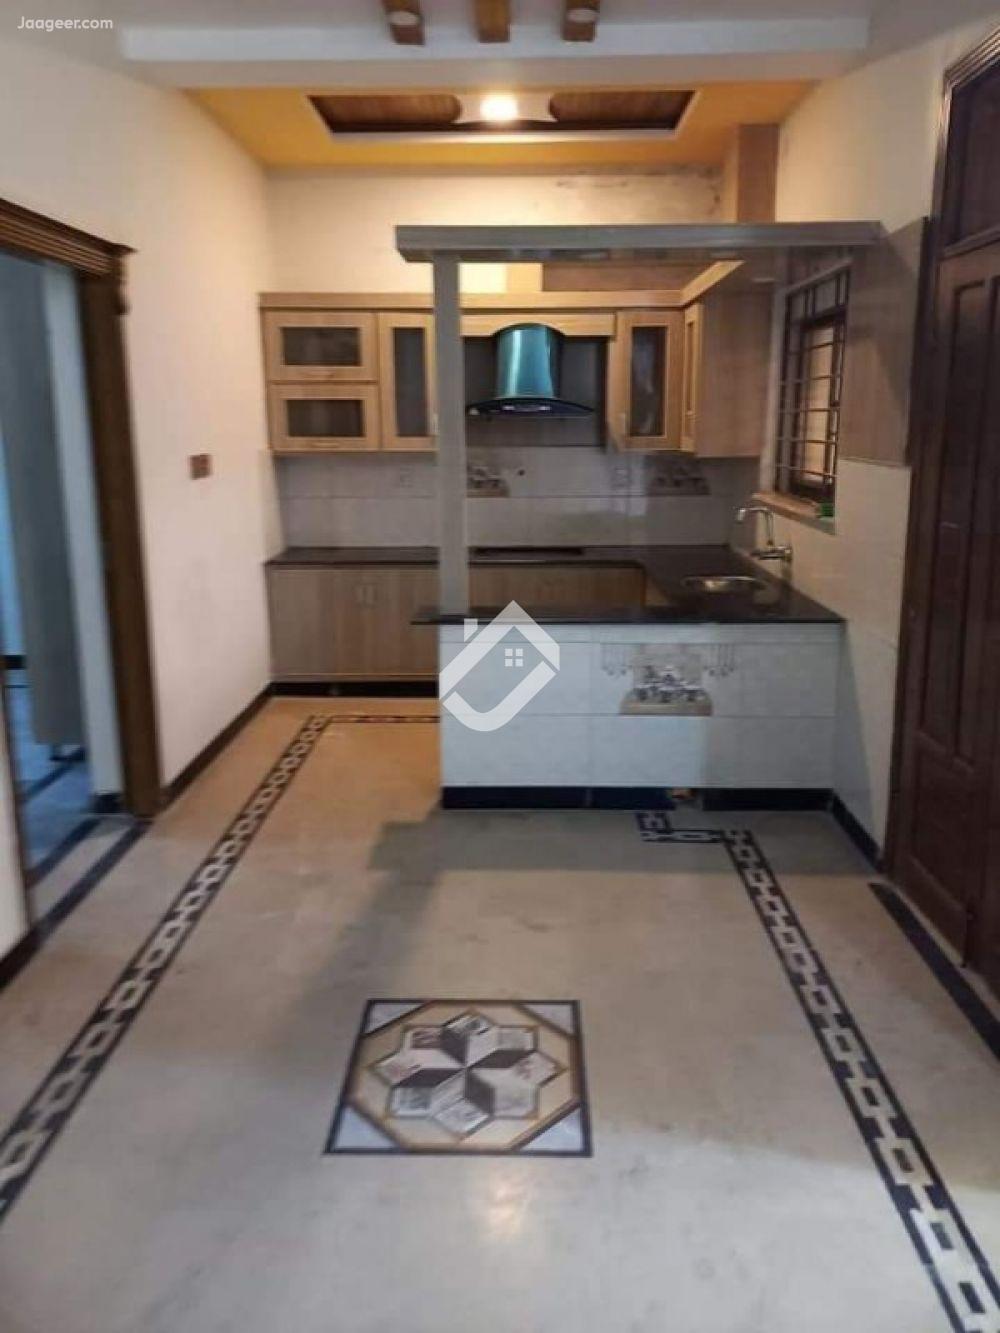 4 Marla Triple Storey House For Rent In Ghauri Town Phase 4C2 in Ghauri Town, Islamabad